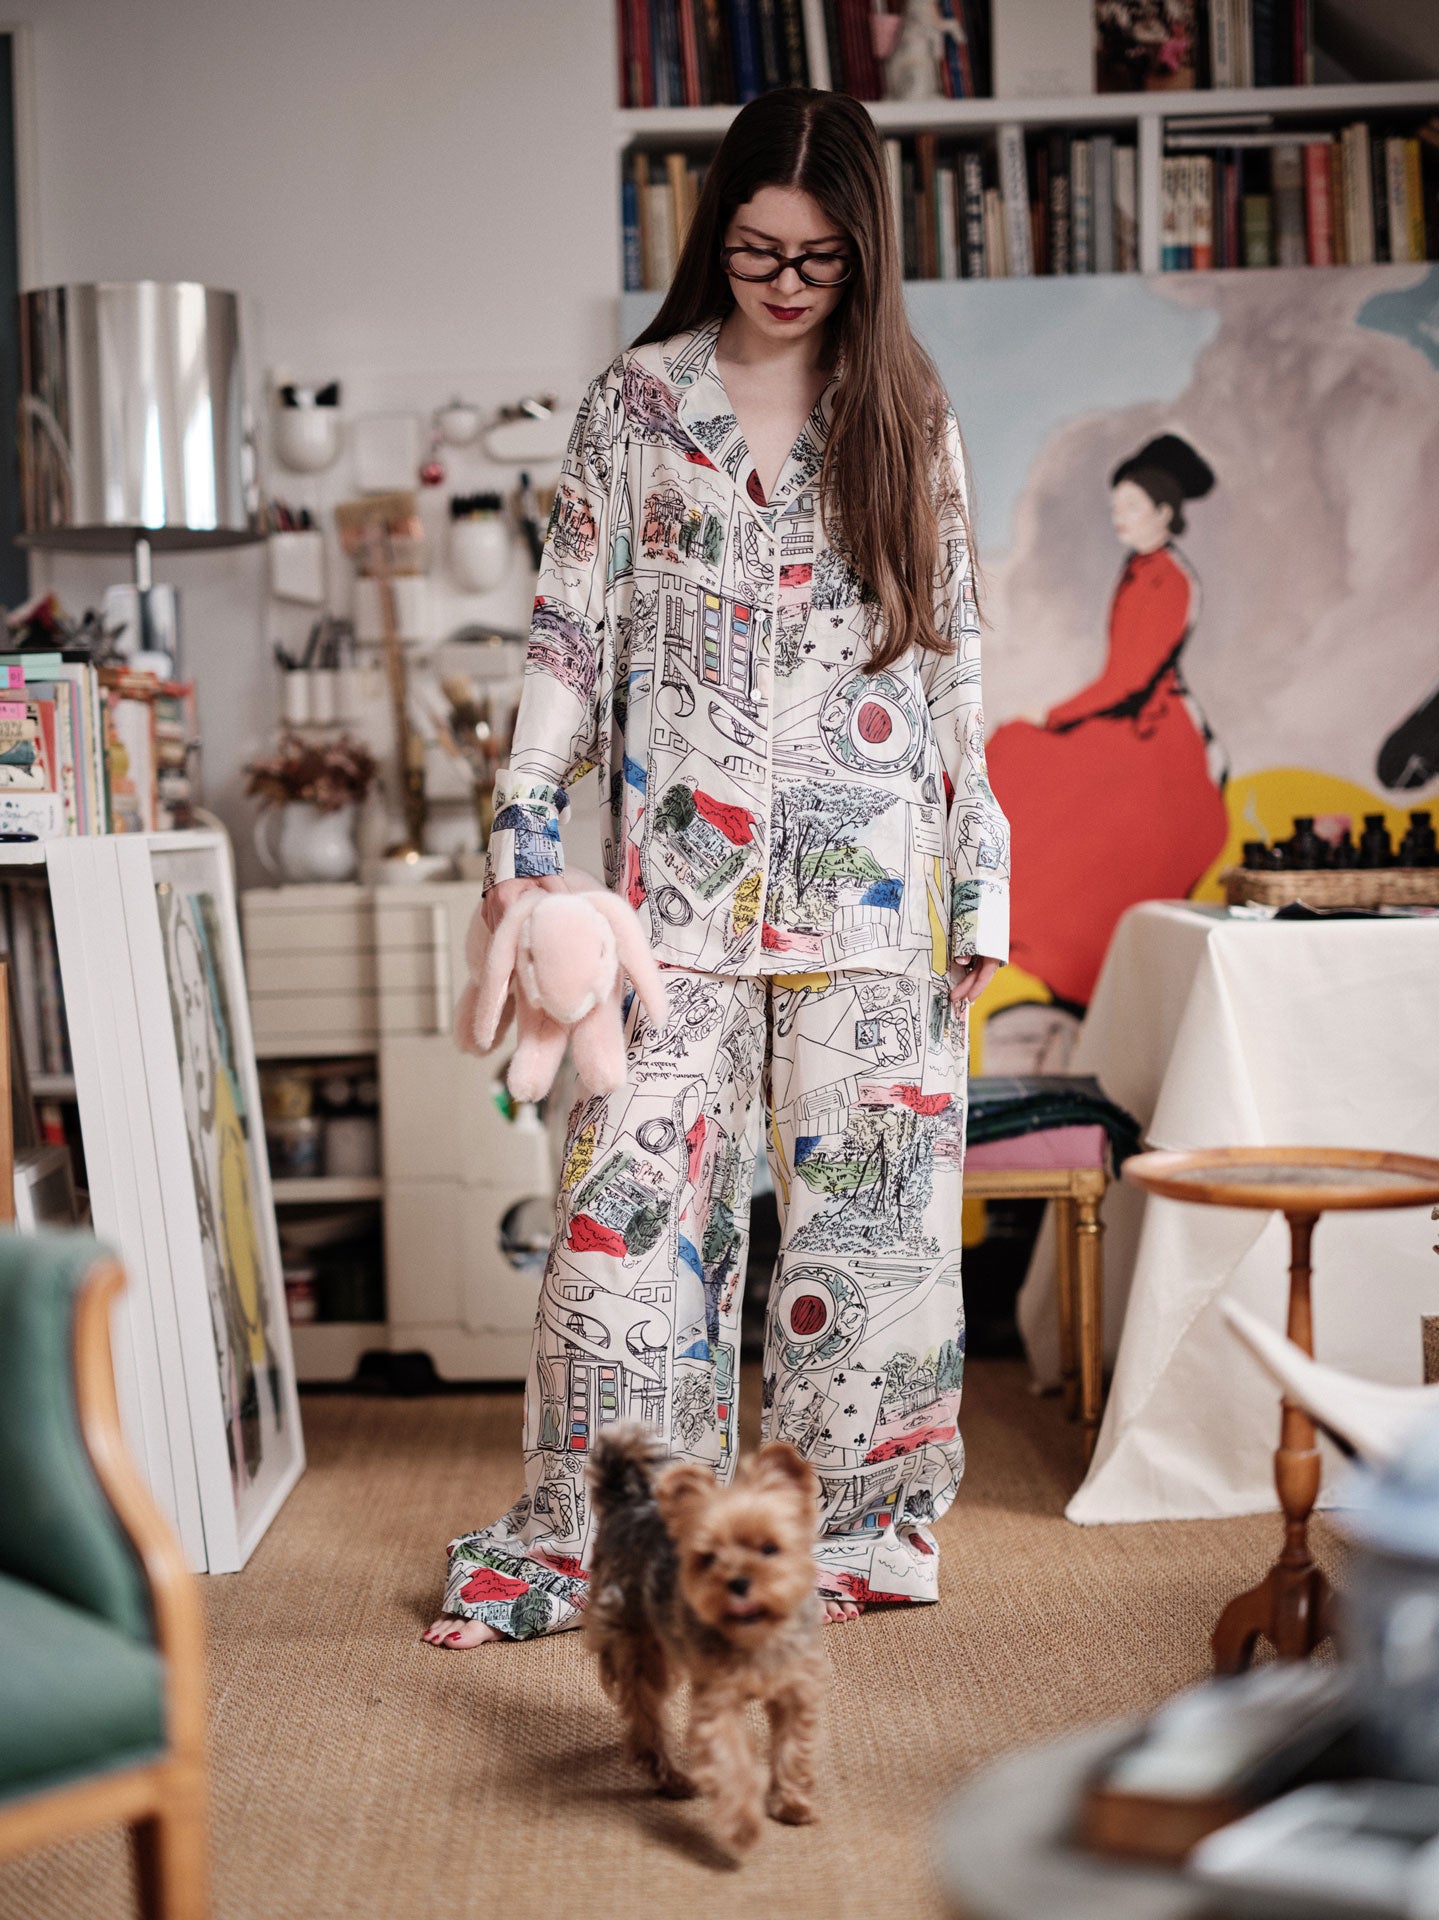  Sacha  photographed in her studio wearing ALBERTINE Pyjama by Thierry Colson - Scarf pattern by Floch Poliakoff by Stéphane Gautronneau